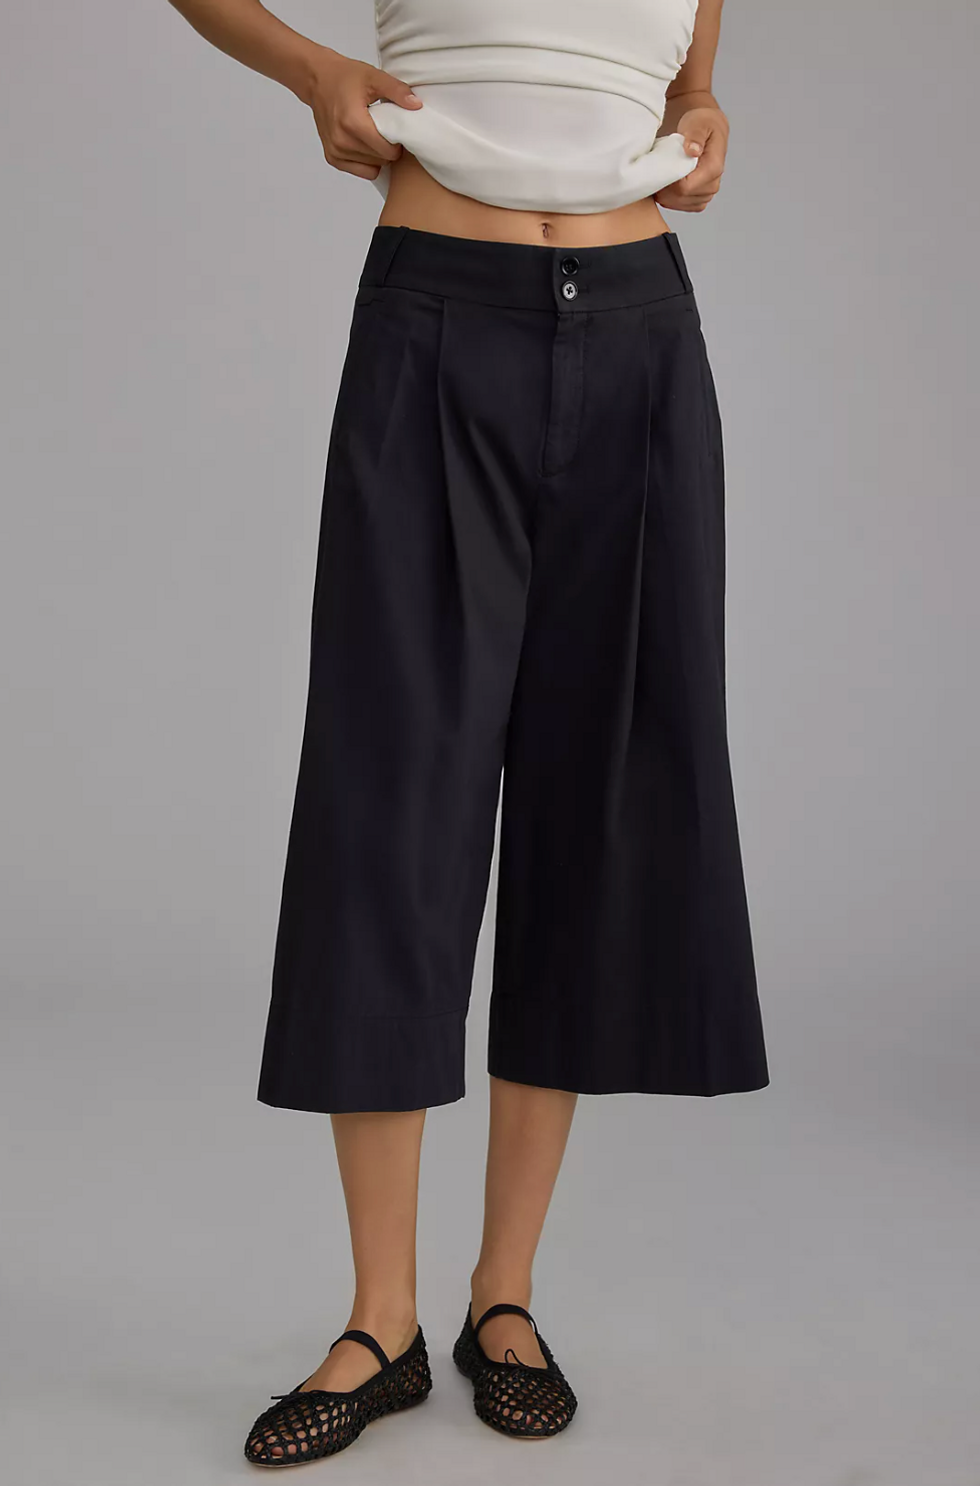 By Anthropologie Cropped Wide-Leg Trousers